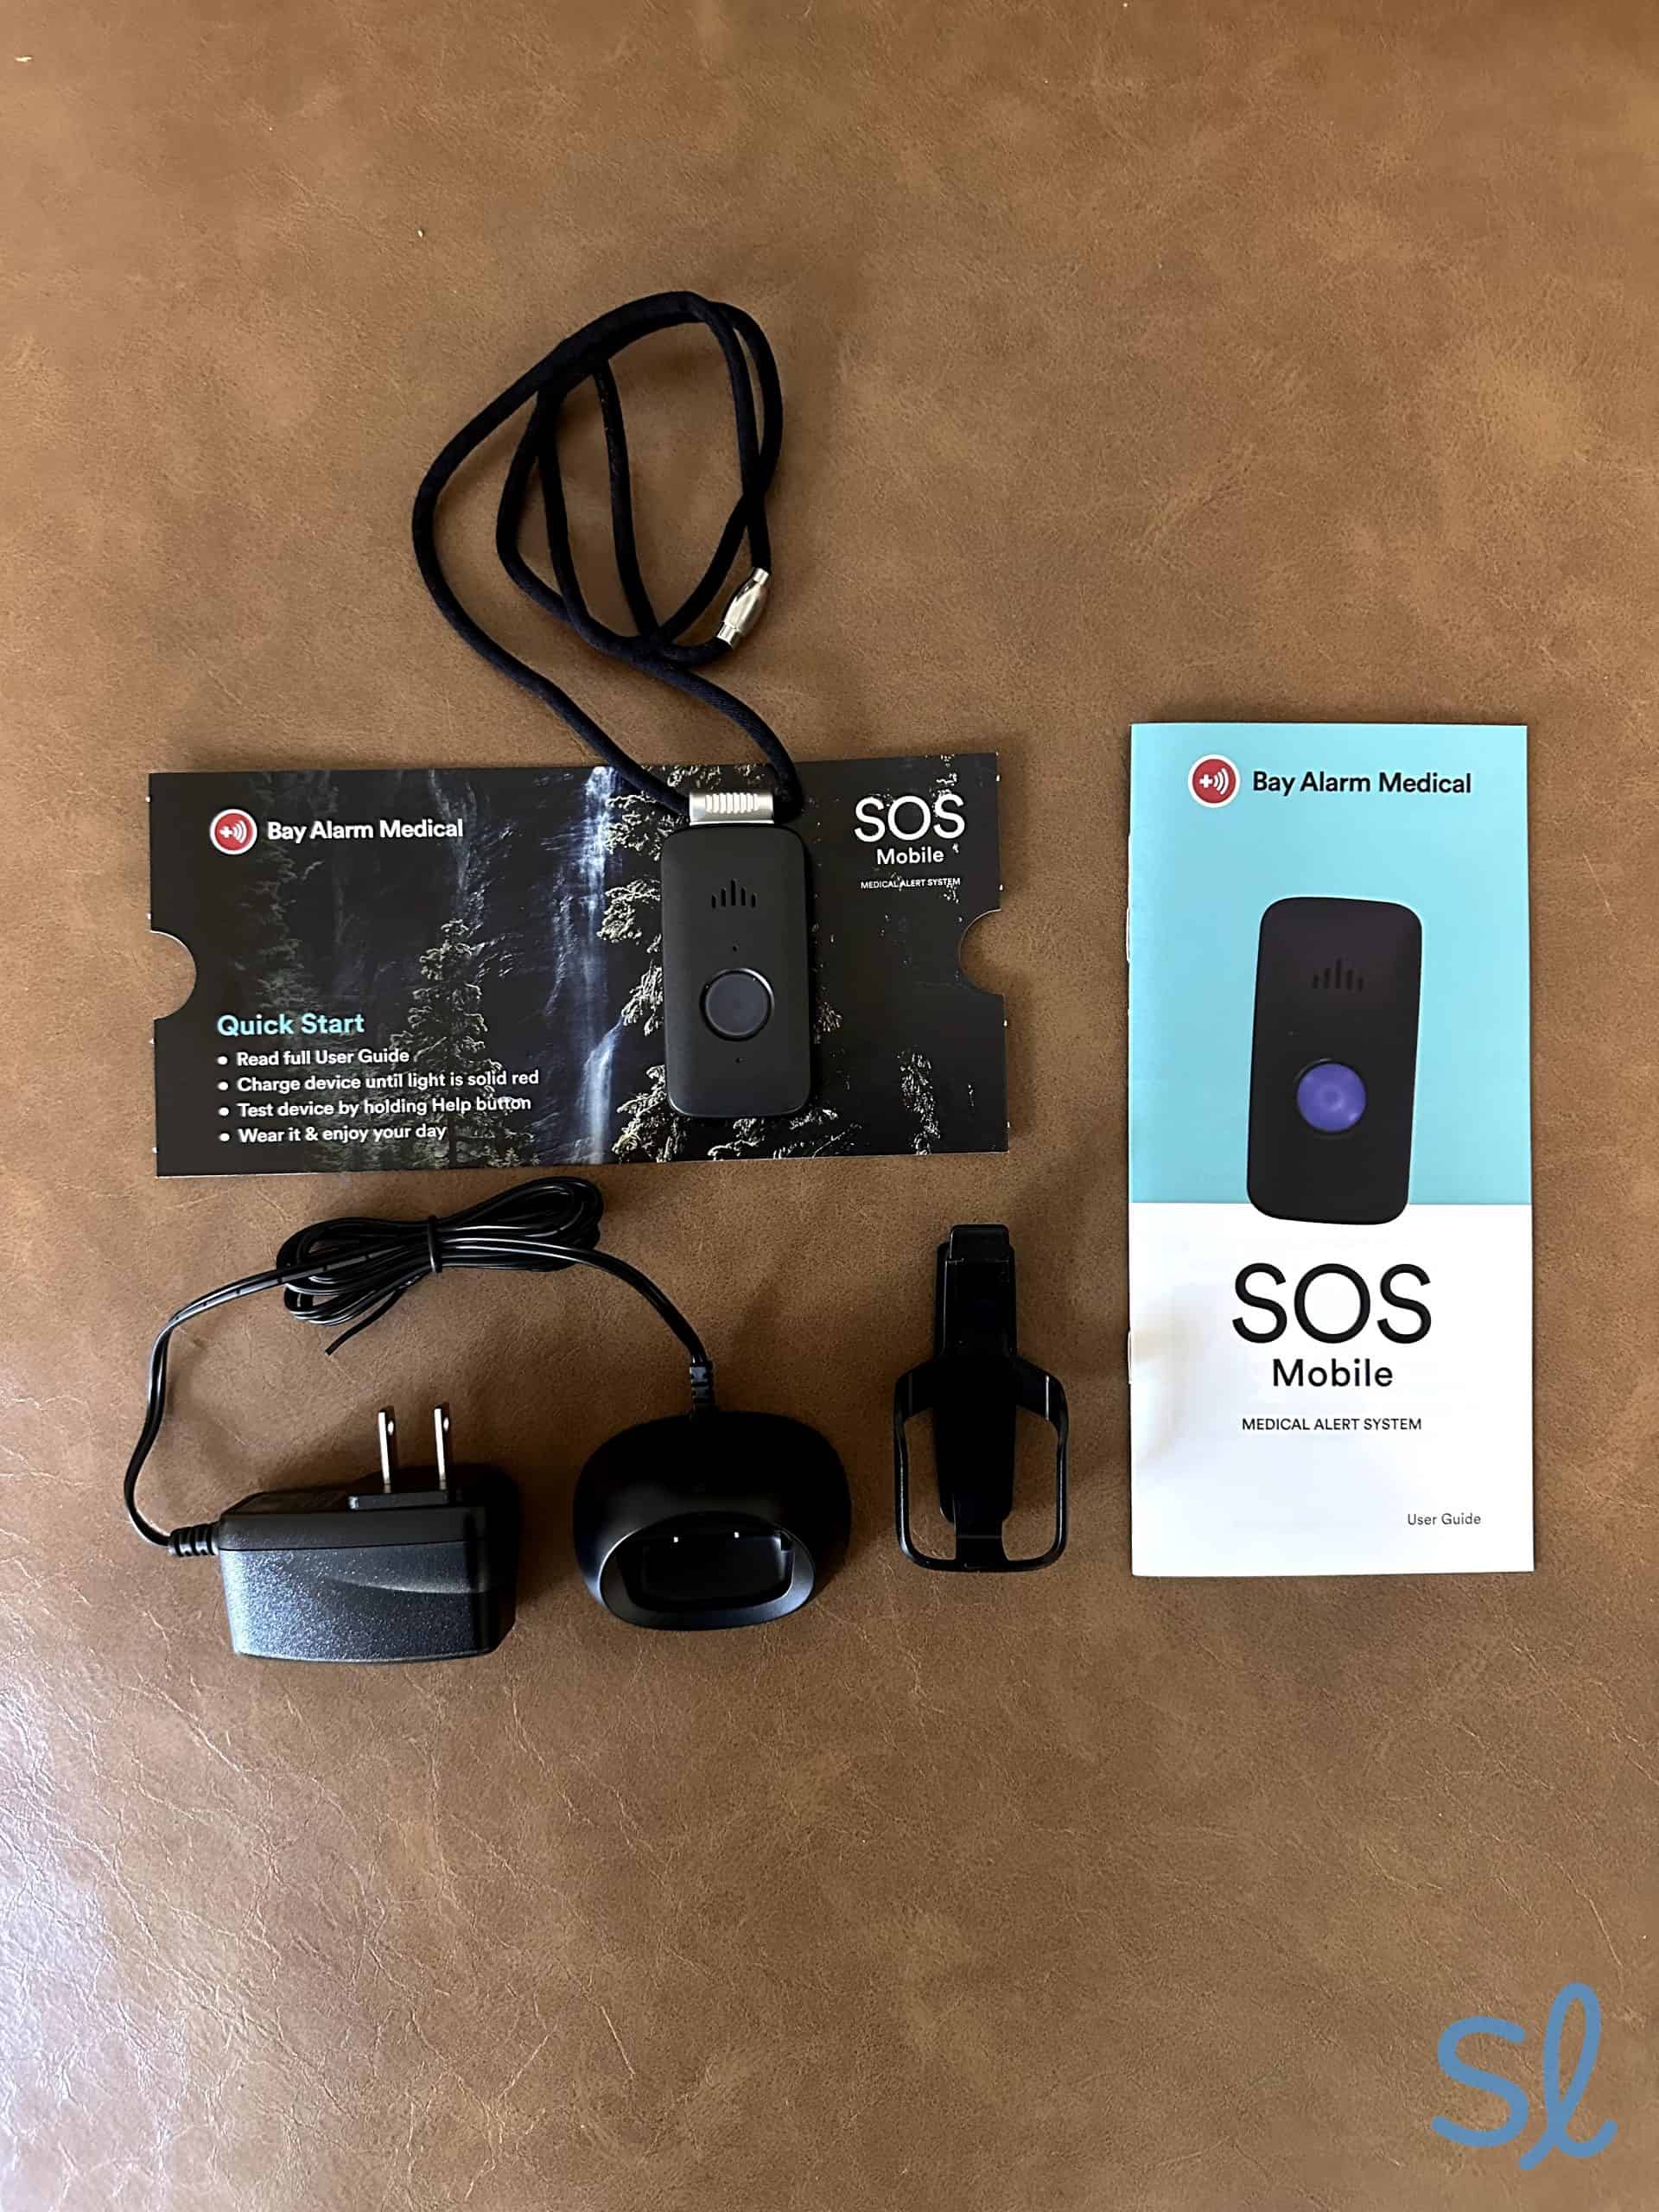 Unboxing my SOS Mobile unit from Bay Alarm Medical